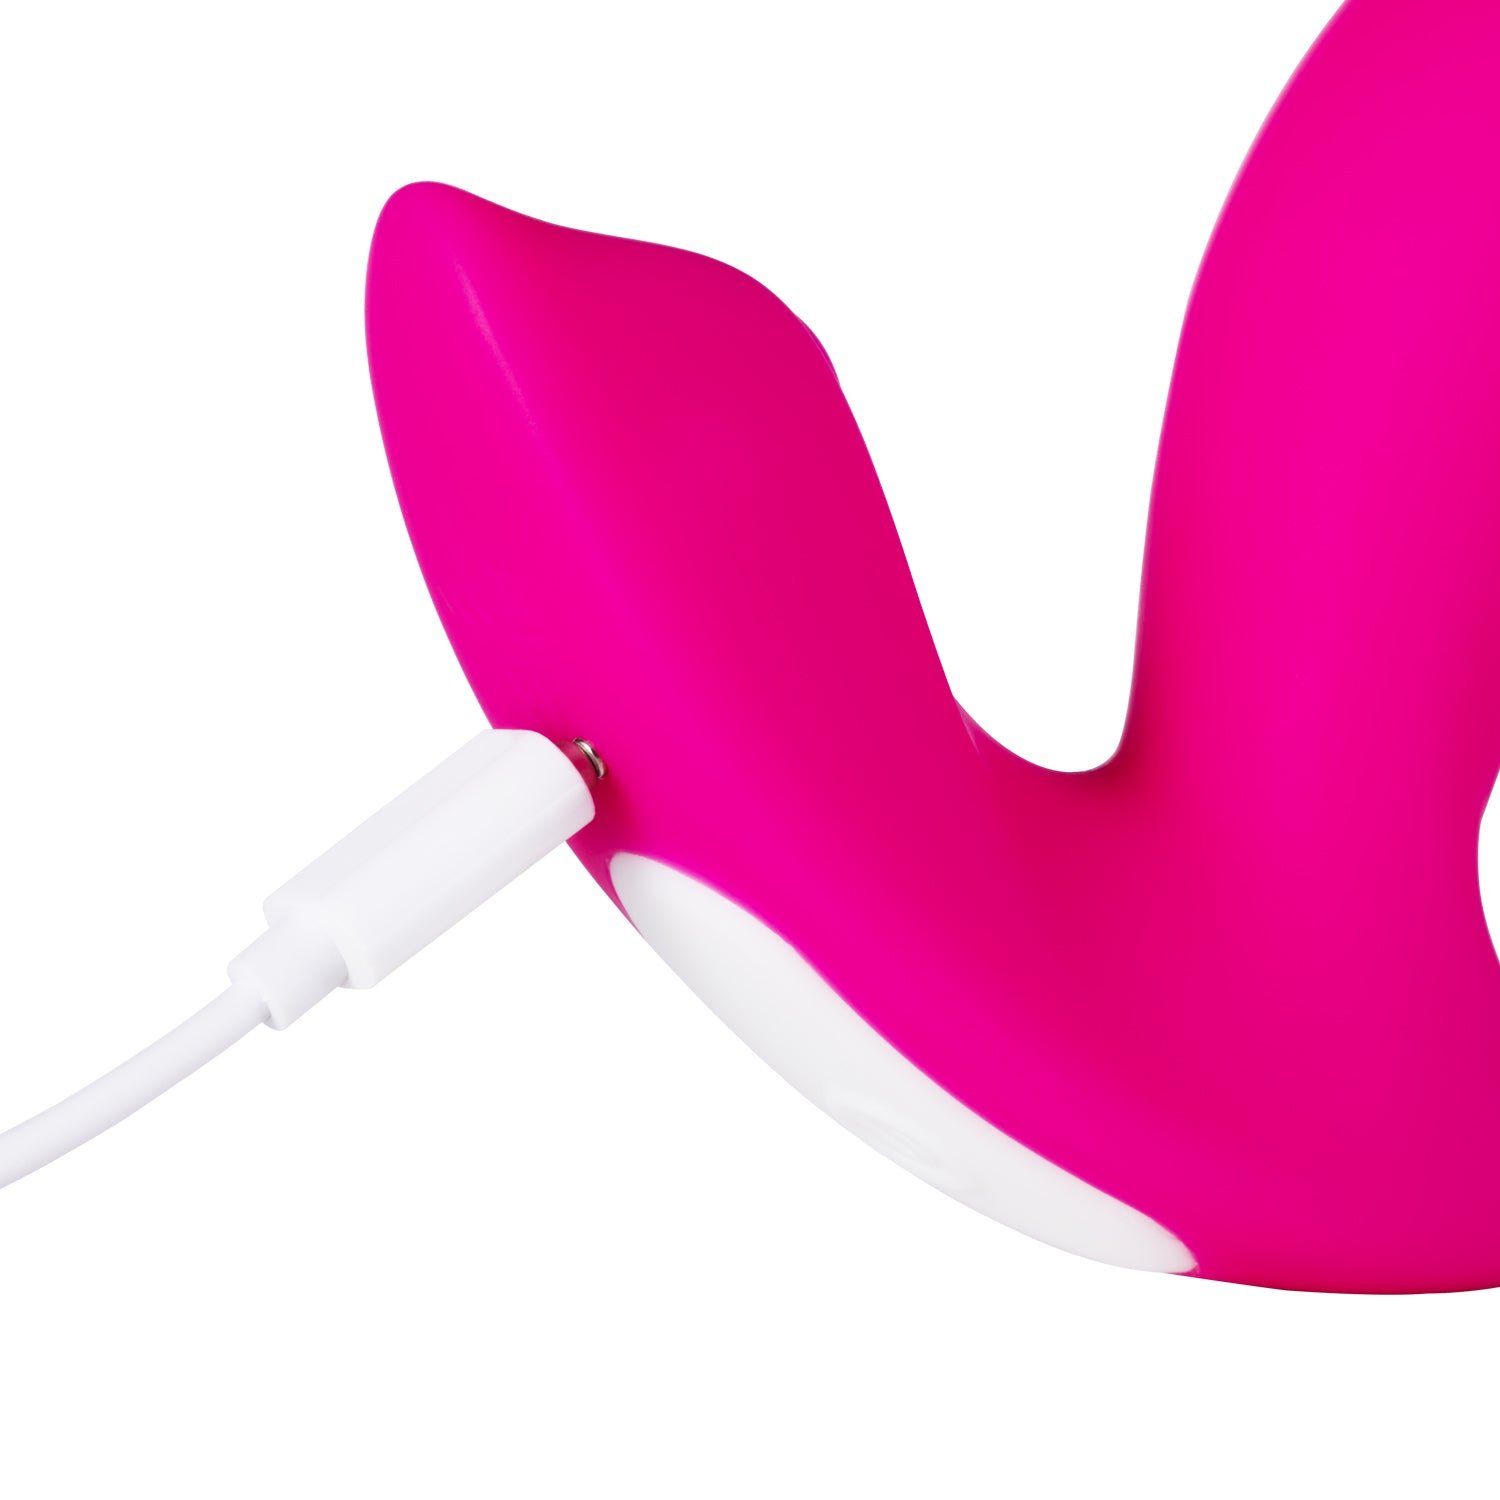 Crave - G-Spot Vibrator With Rotating Head